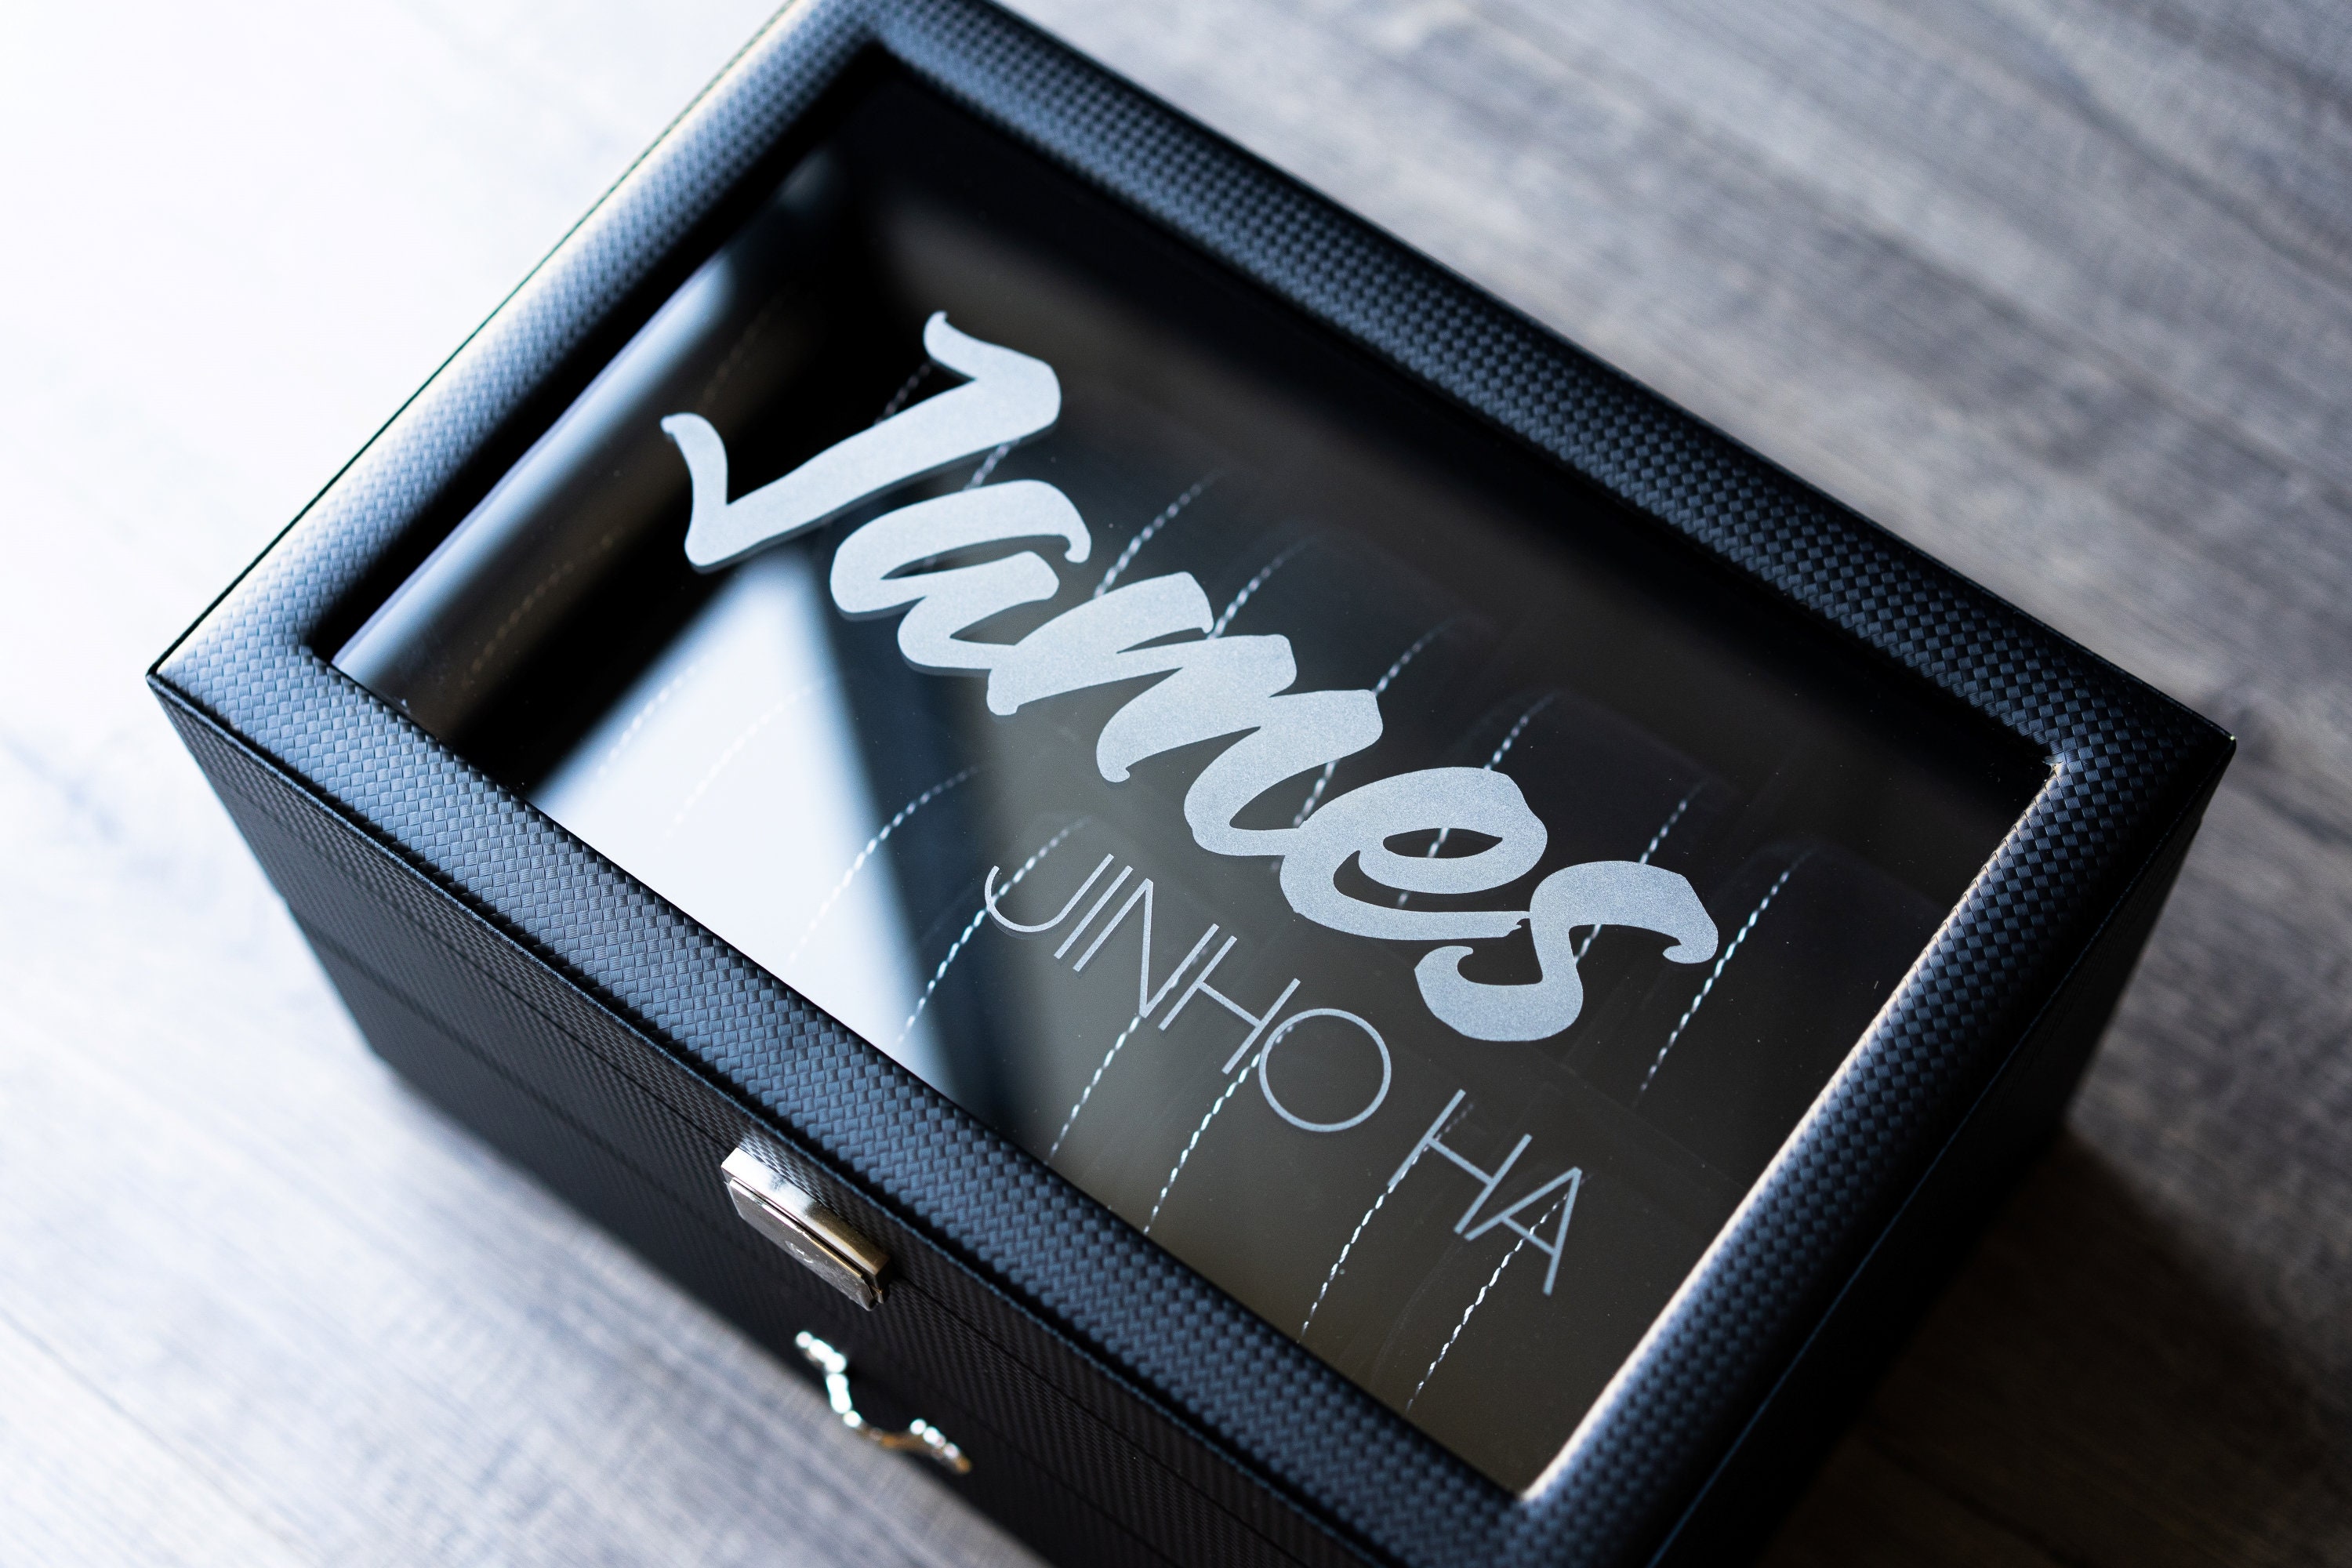 Personalized Watch Box Carbon Fiber Design Holds 20 